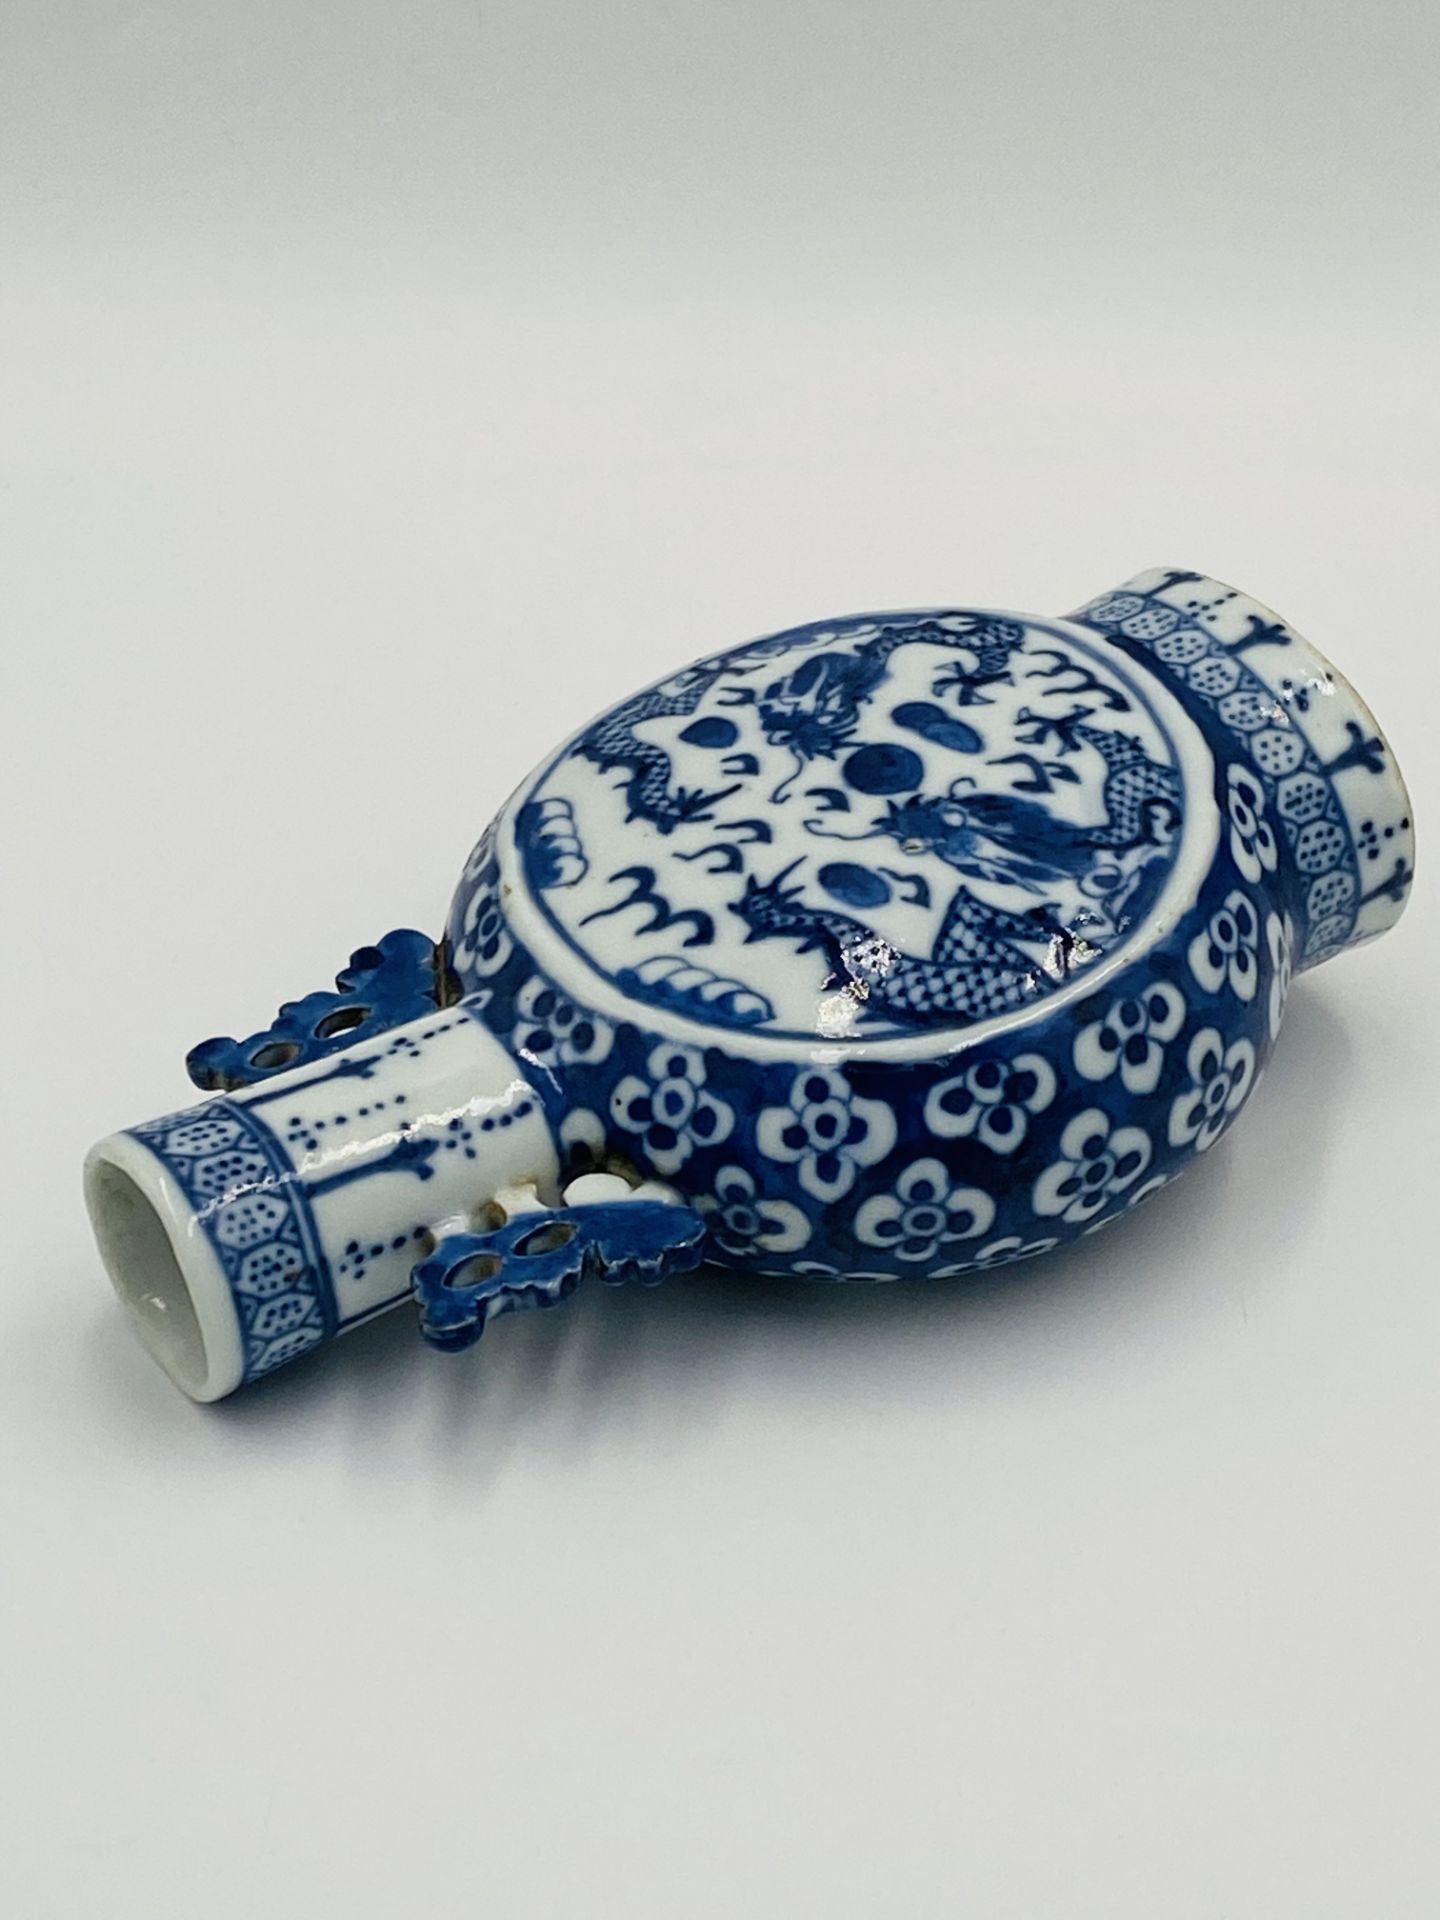 Chinese moon flask, circa 1900 - Image 5 of 7